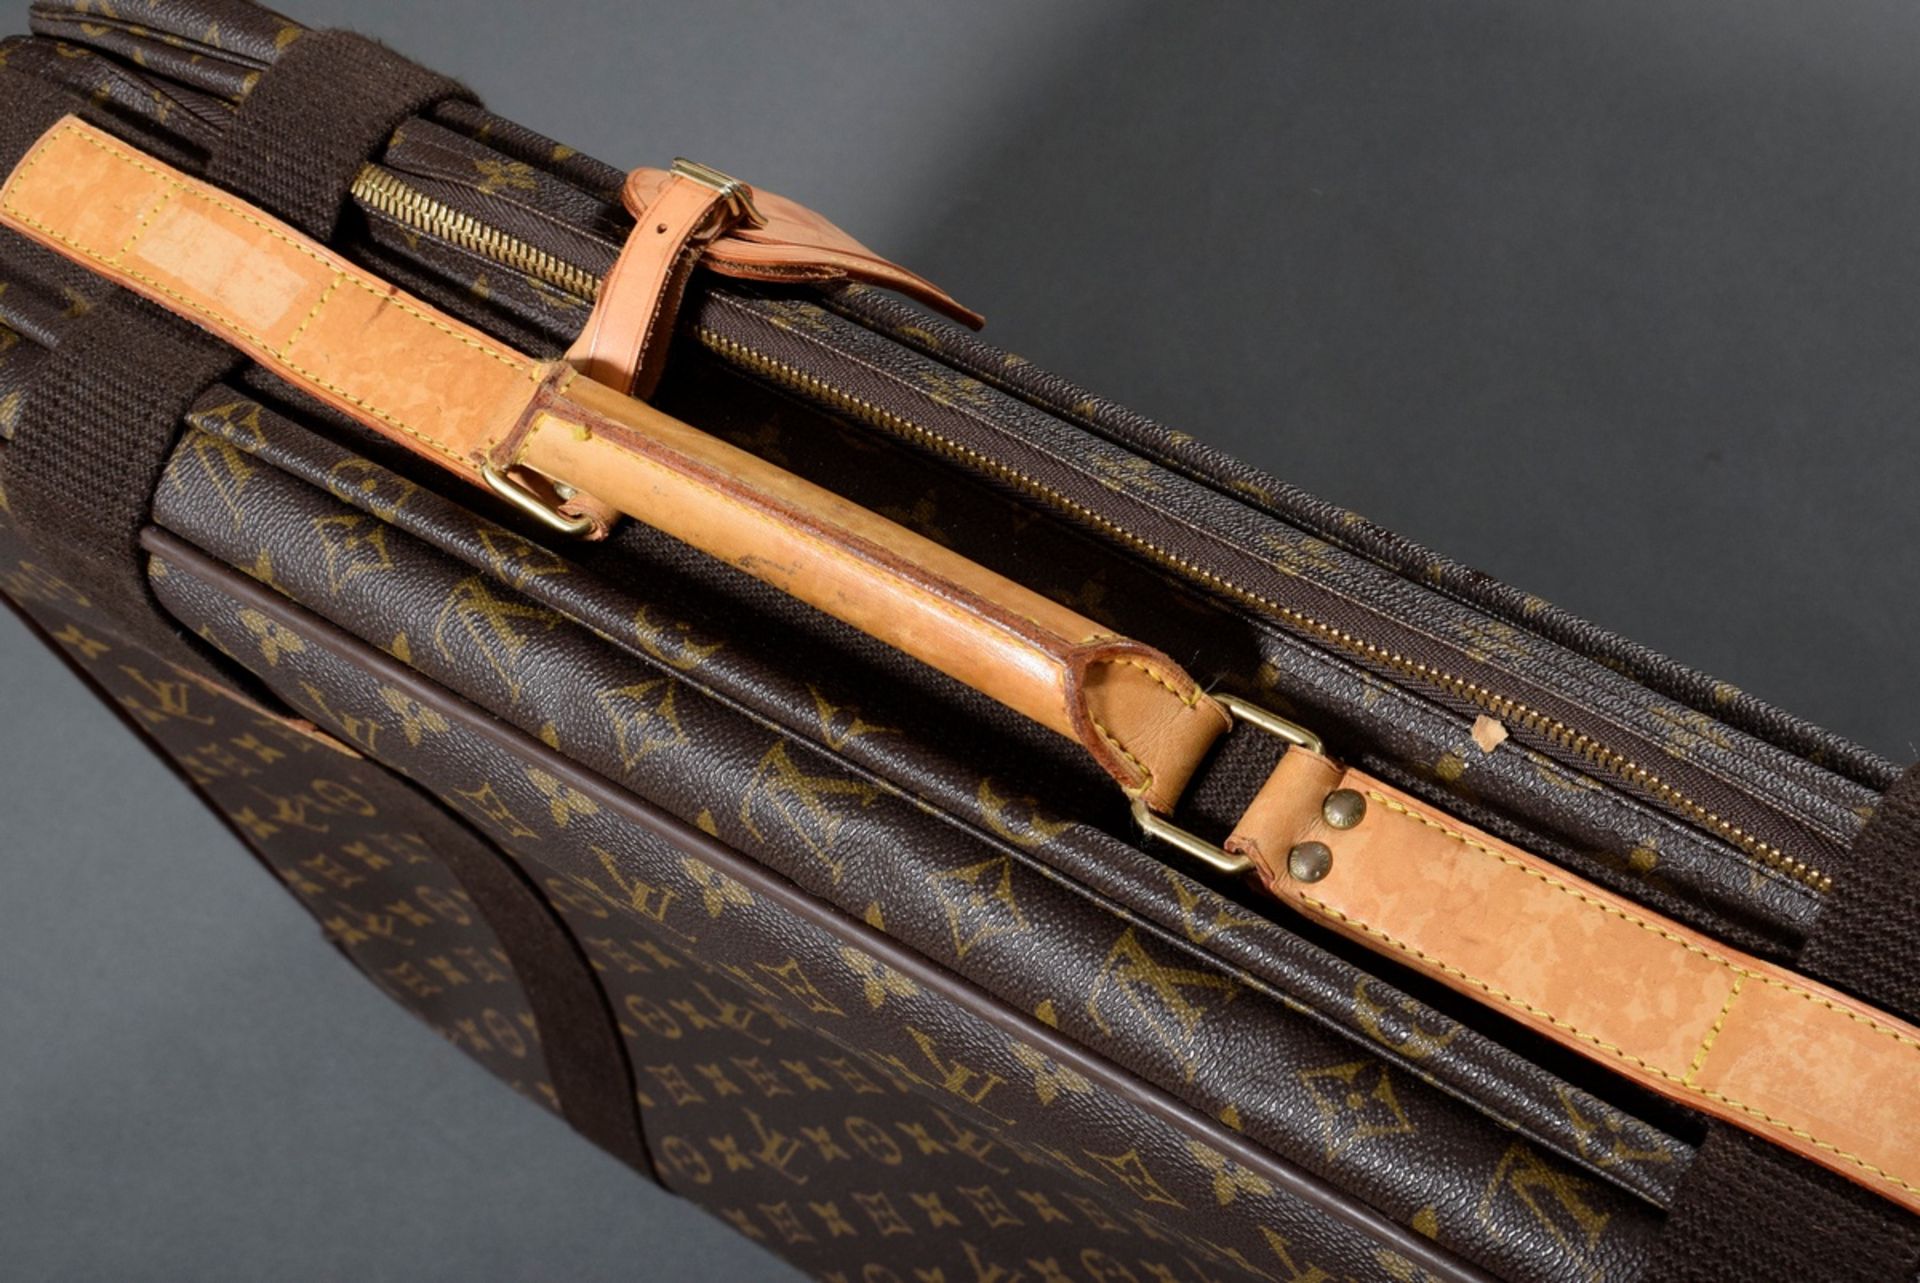 Louis Vuitton suitcase "Satellite 70" in monogrammed canvas with light cowhide details, gold-colour - Image 3 of 6